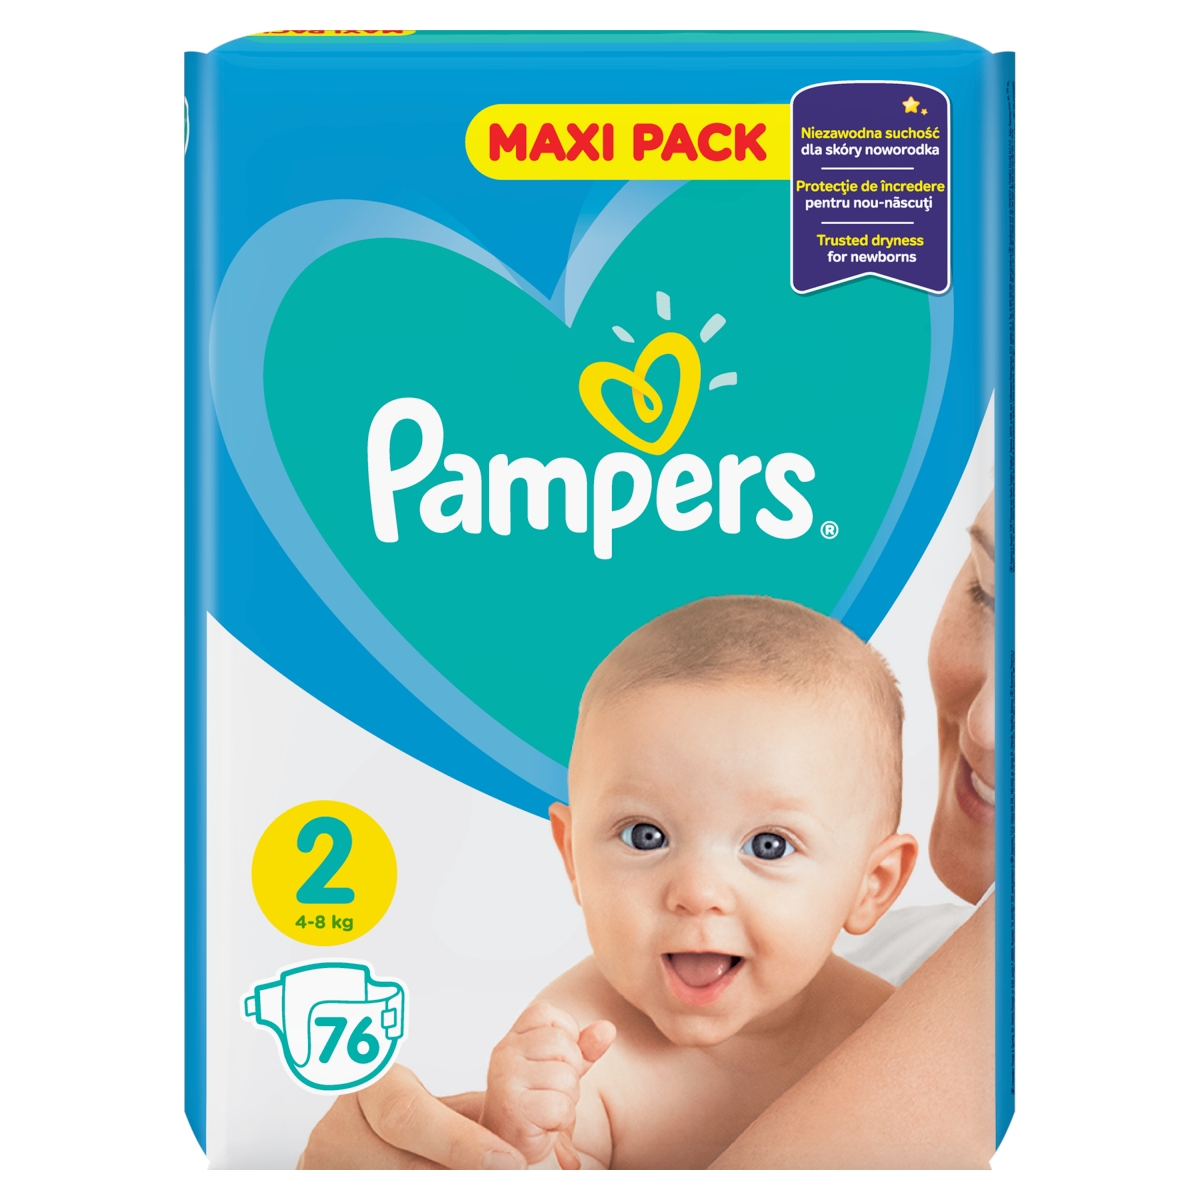 baby dream a pampers